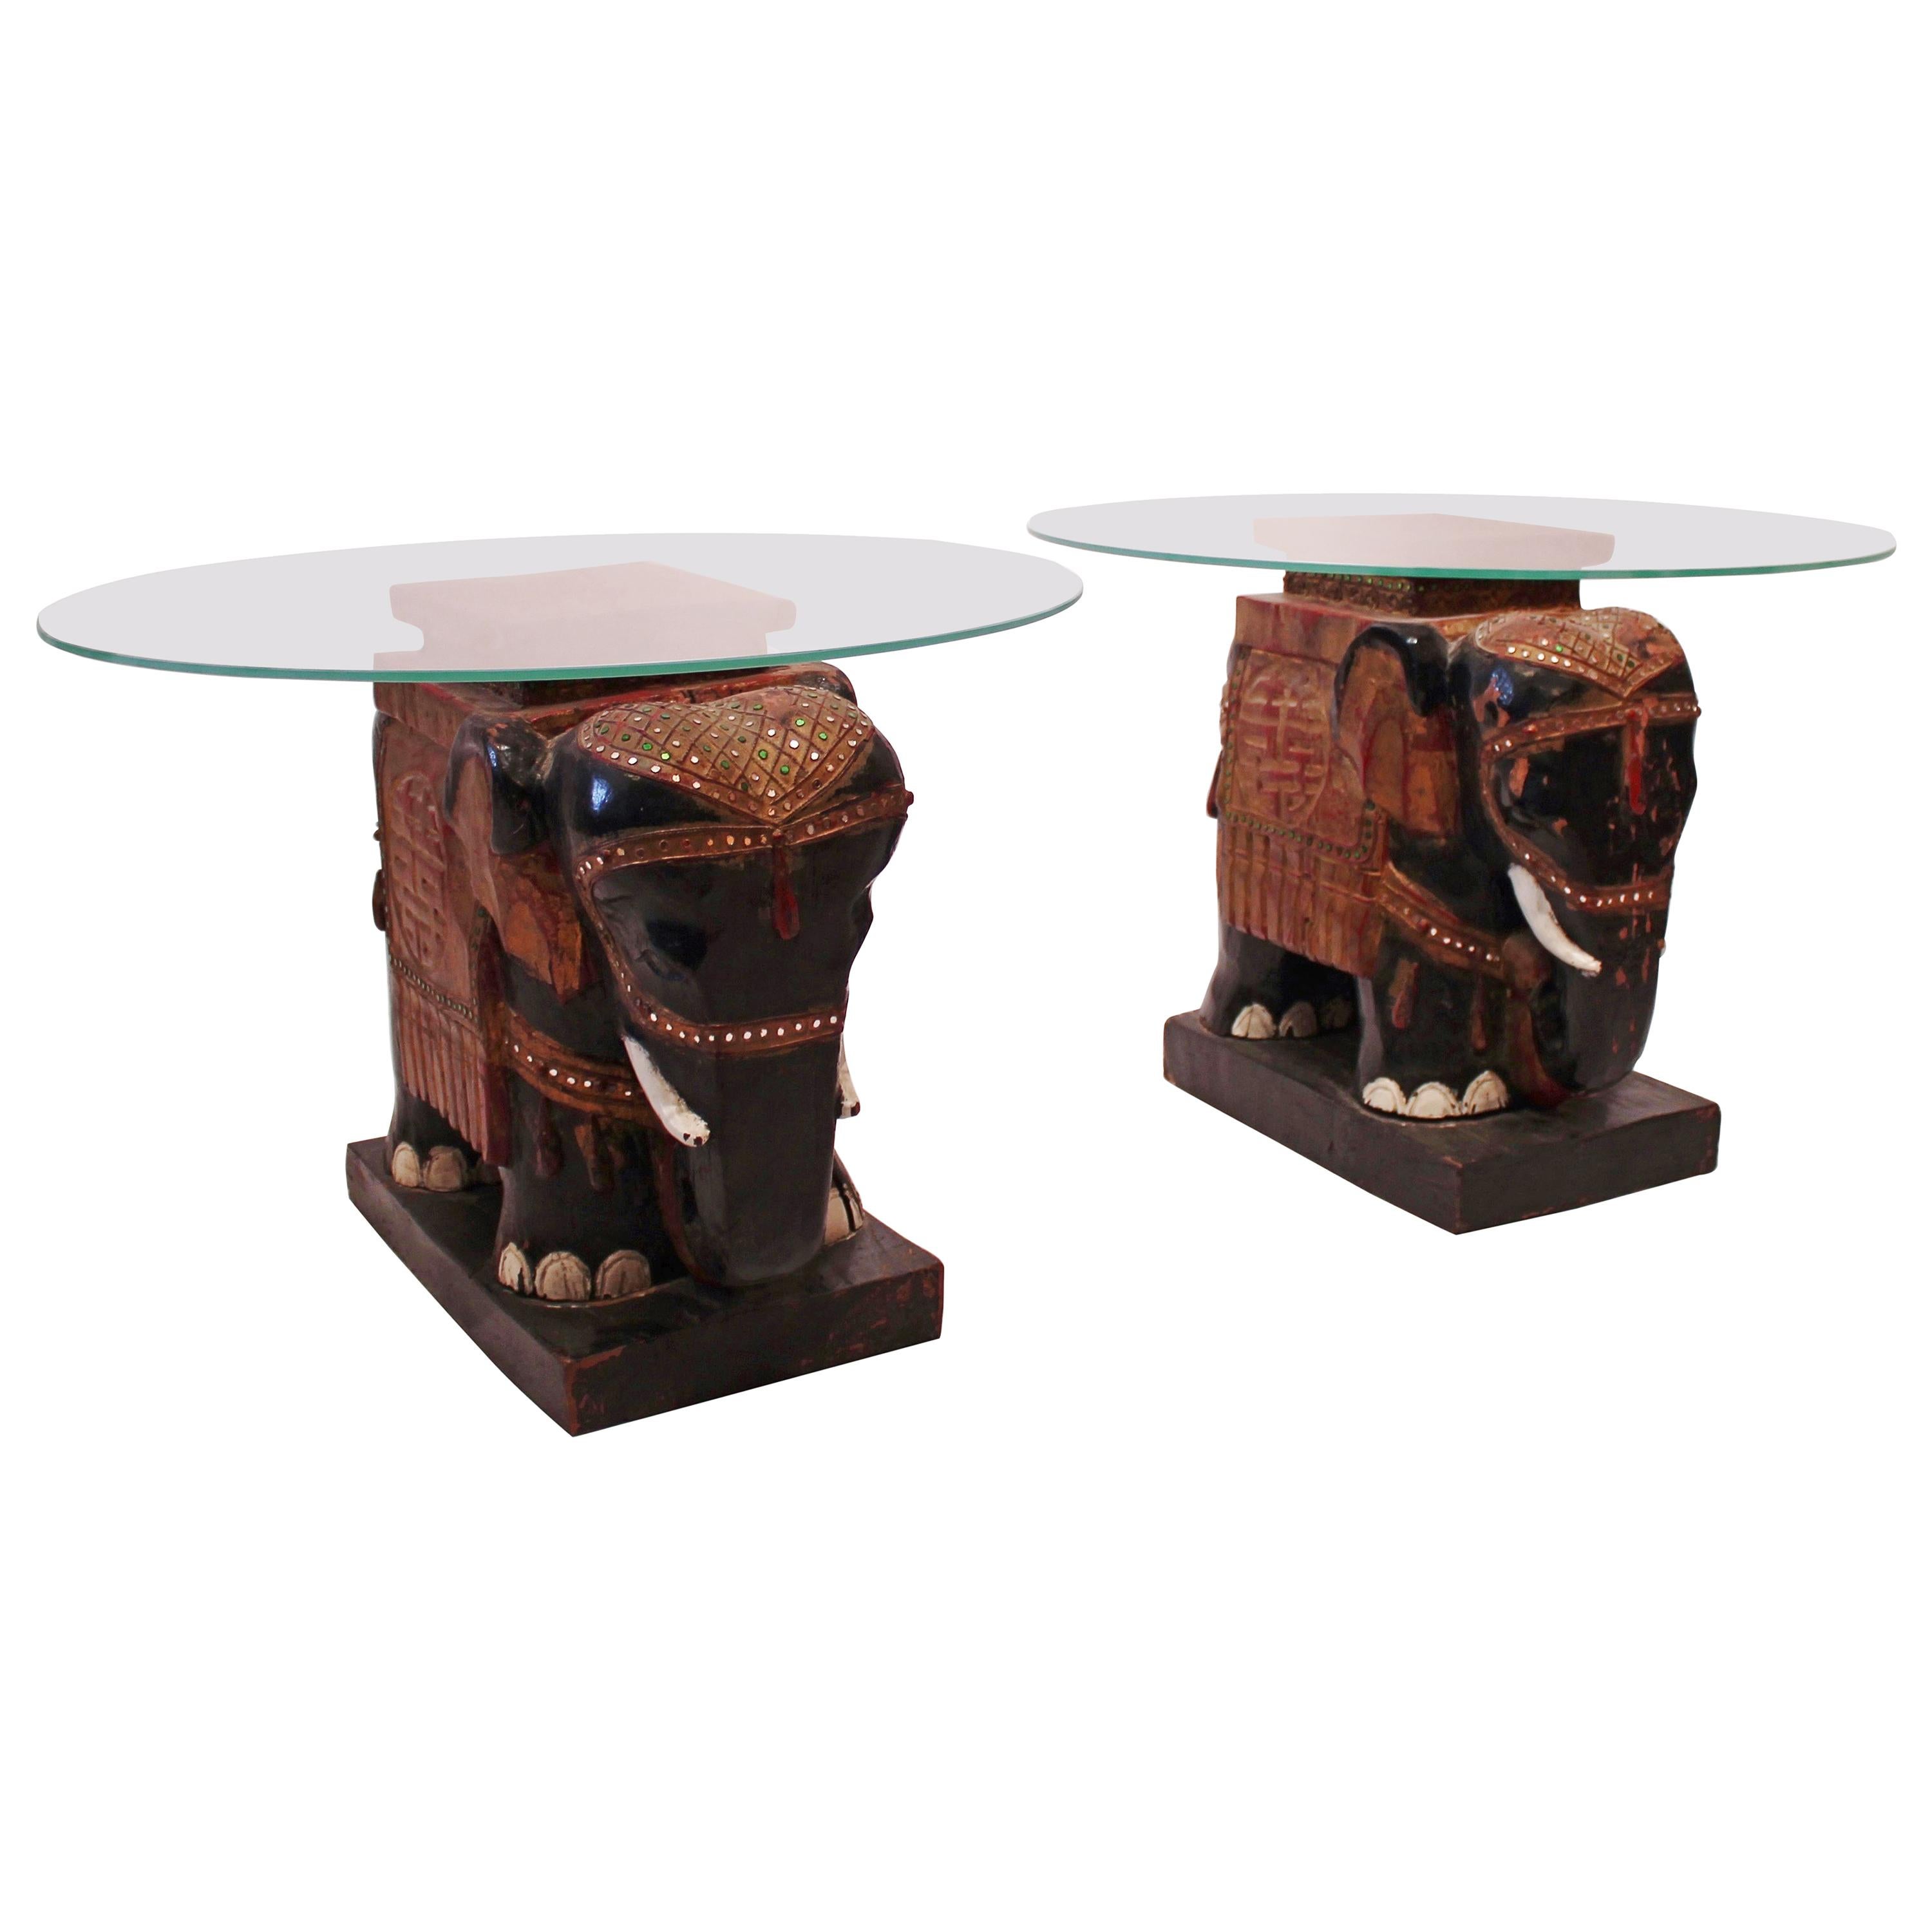 Pair of Sidetables with Glass Plate and Bottom of Chinese Elephants, 1880s